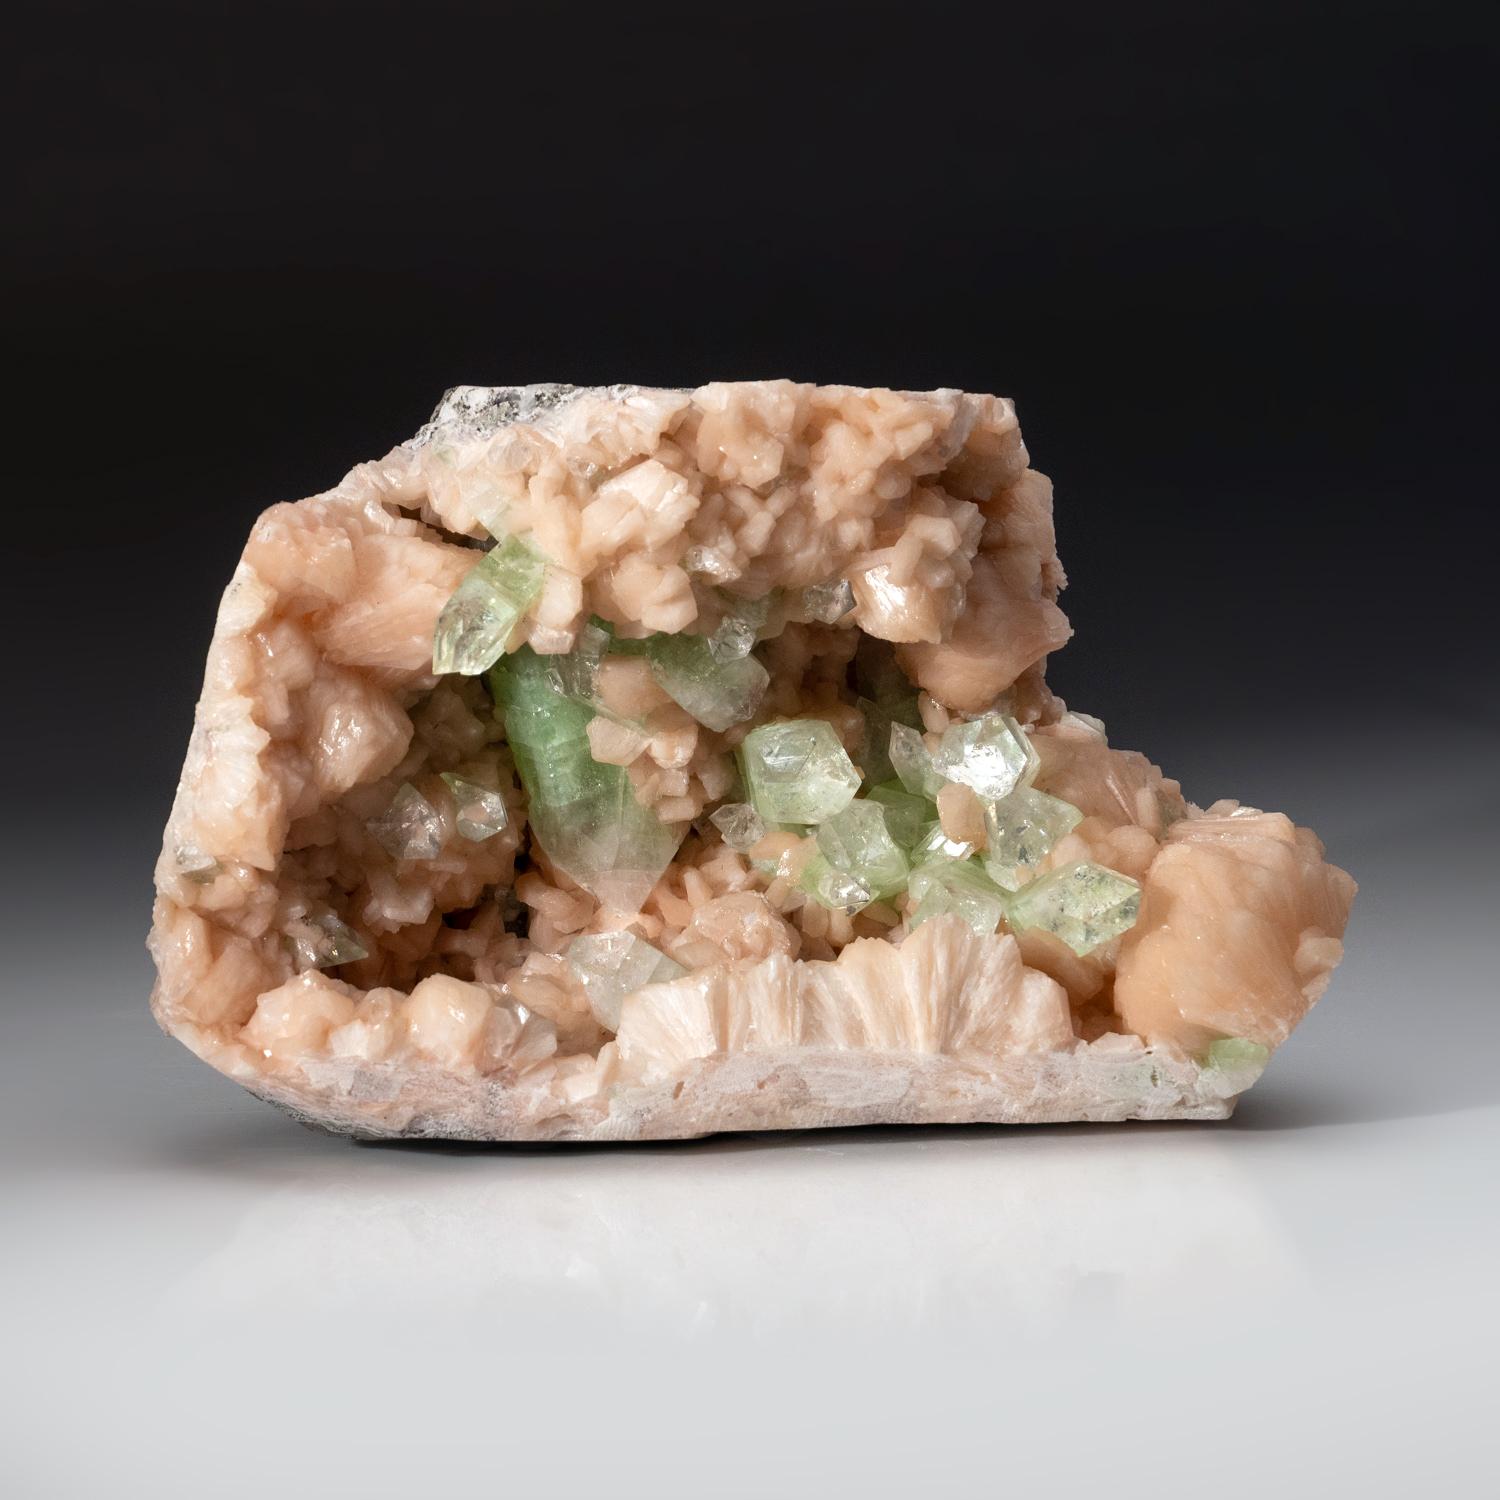 From Jalgaon, Aurangabad District, Maharastra, India

Exceptional formation of vivid green apophyllite crystals on matrix with large pink stilbite crystals in a wheat sheave formation. The apophyllite crystals are terminated with sharp edges and a